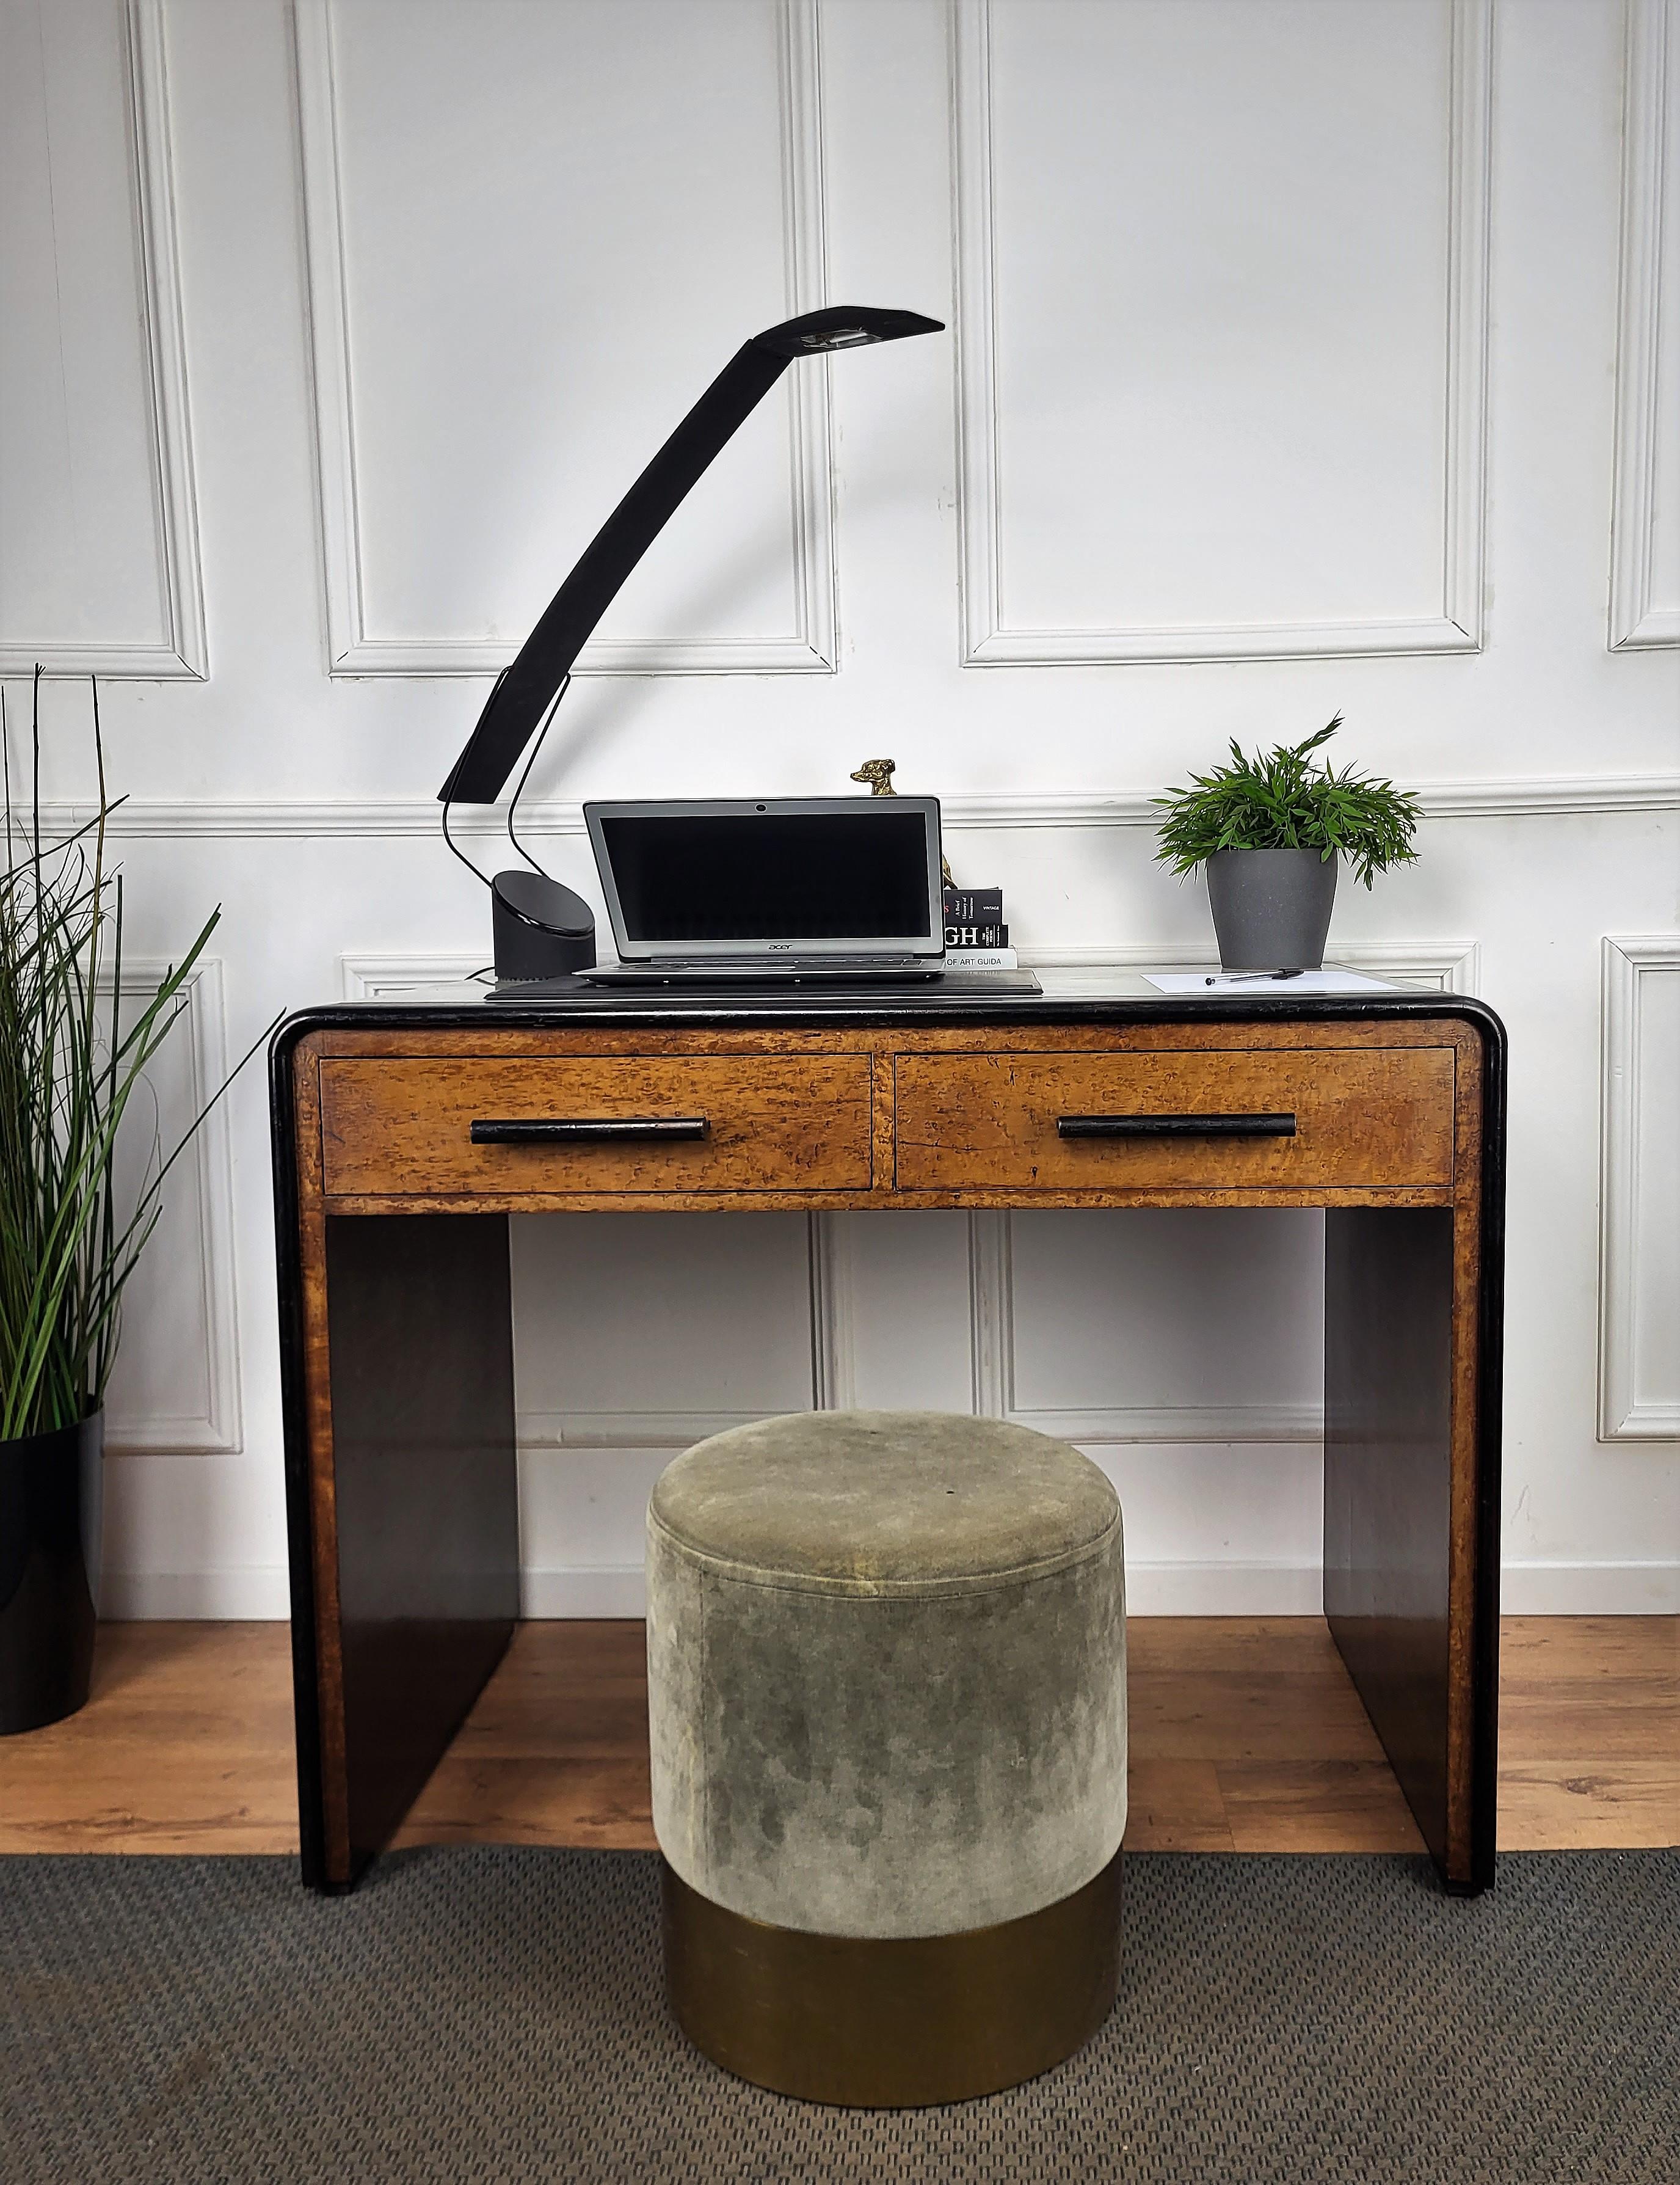 Beautiful Italian Art Deco Mid-Century Modern desk writing table, in beautiful veneer burl wood, with elegant glass top, curved sides and two central drawers. The unique and typical design, with the clean geometric shape enrich the natural pattern